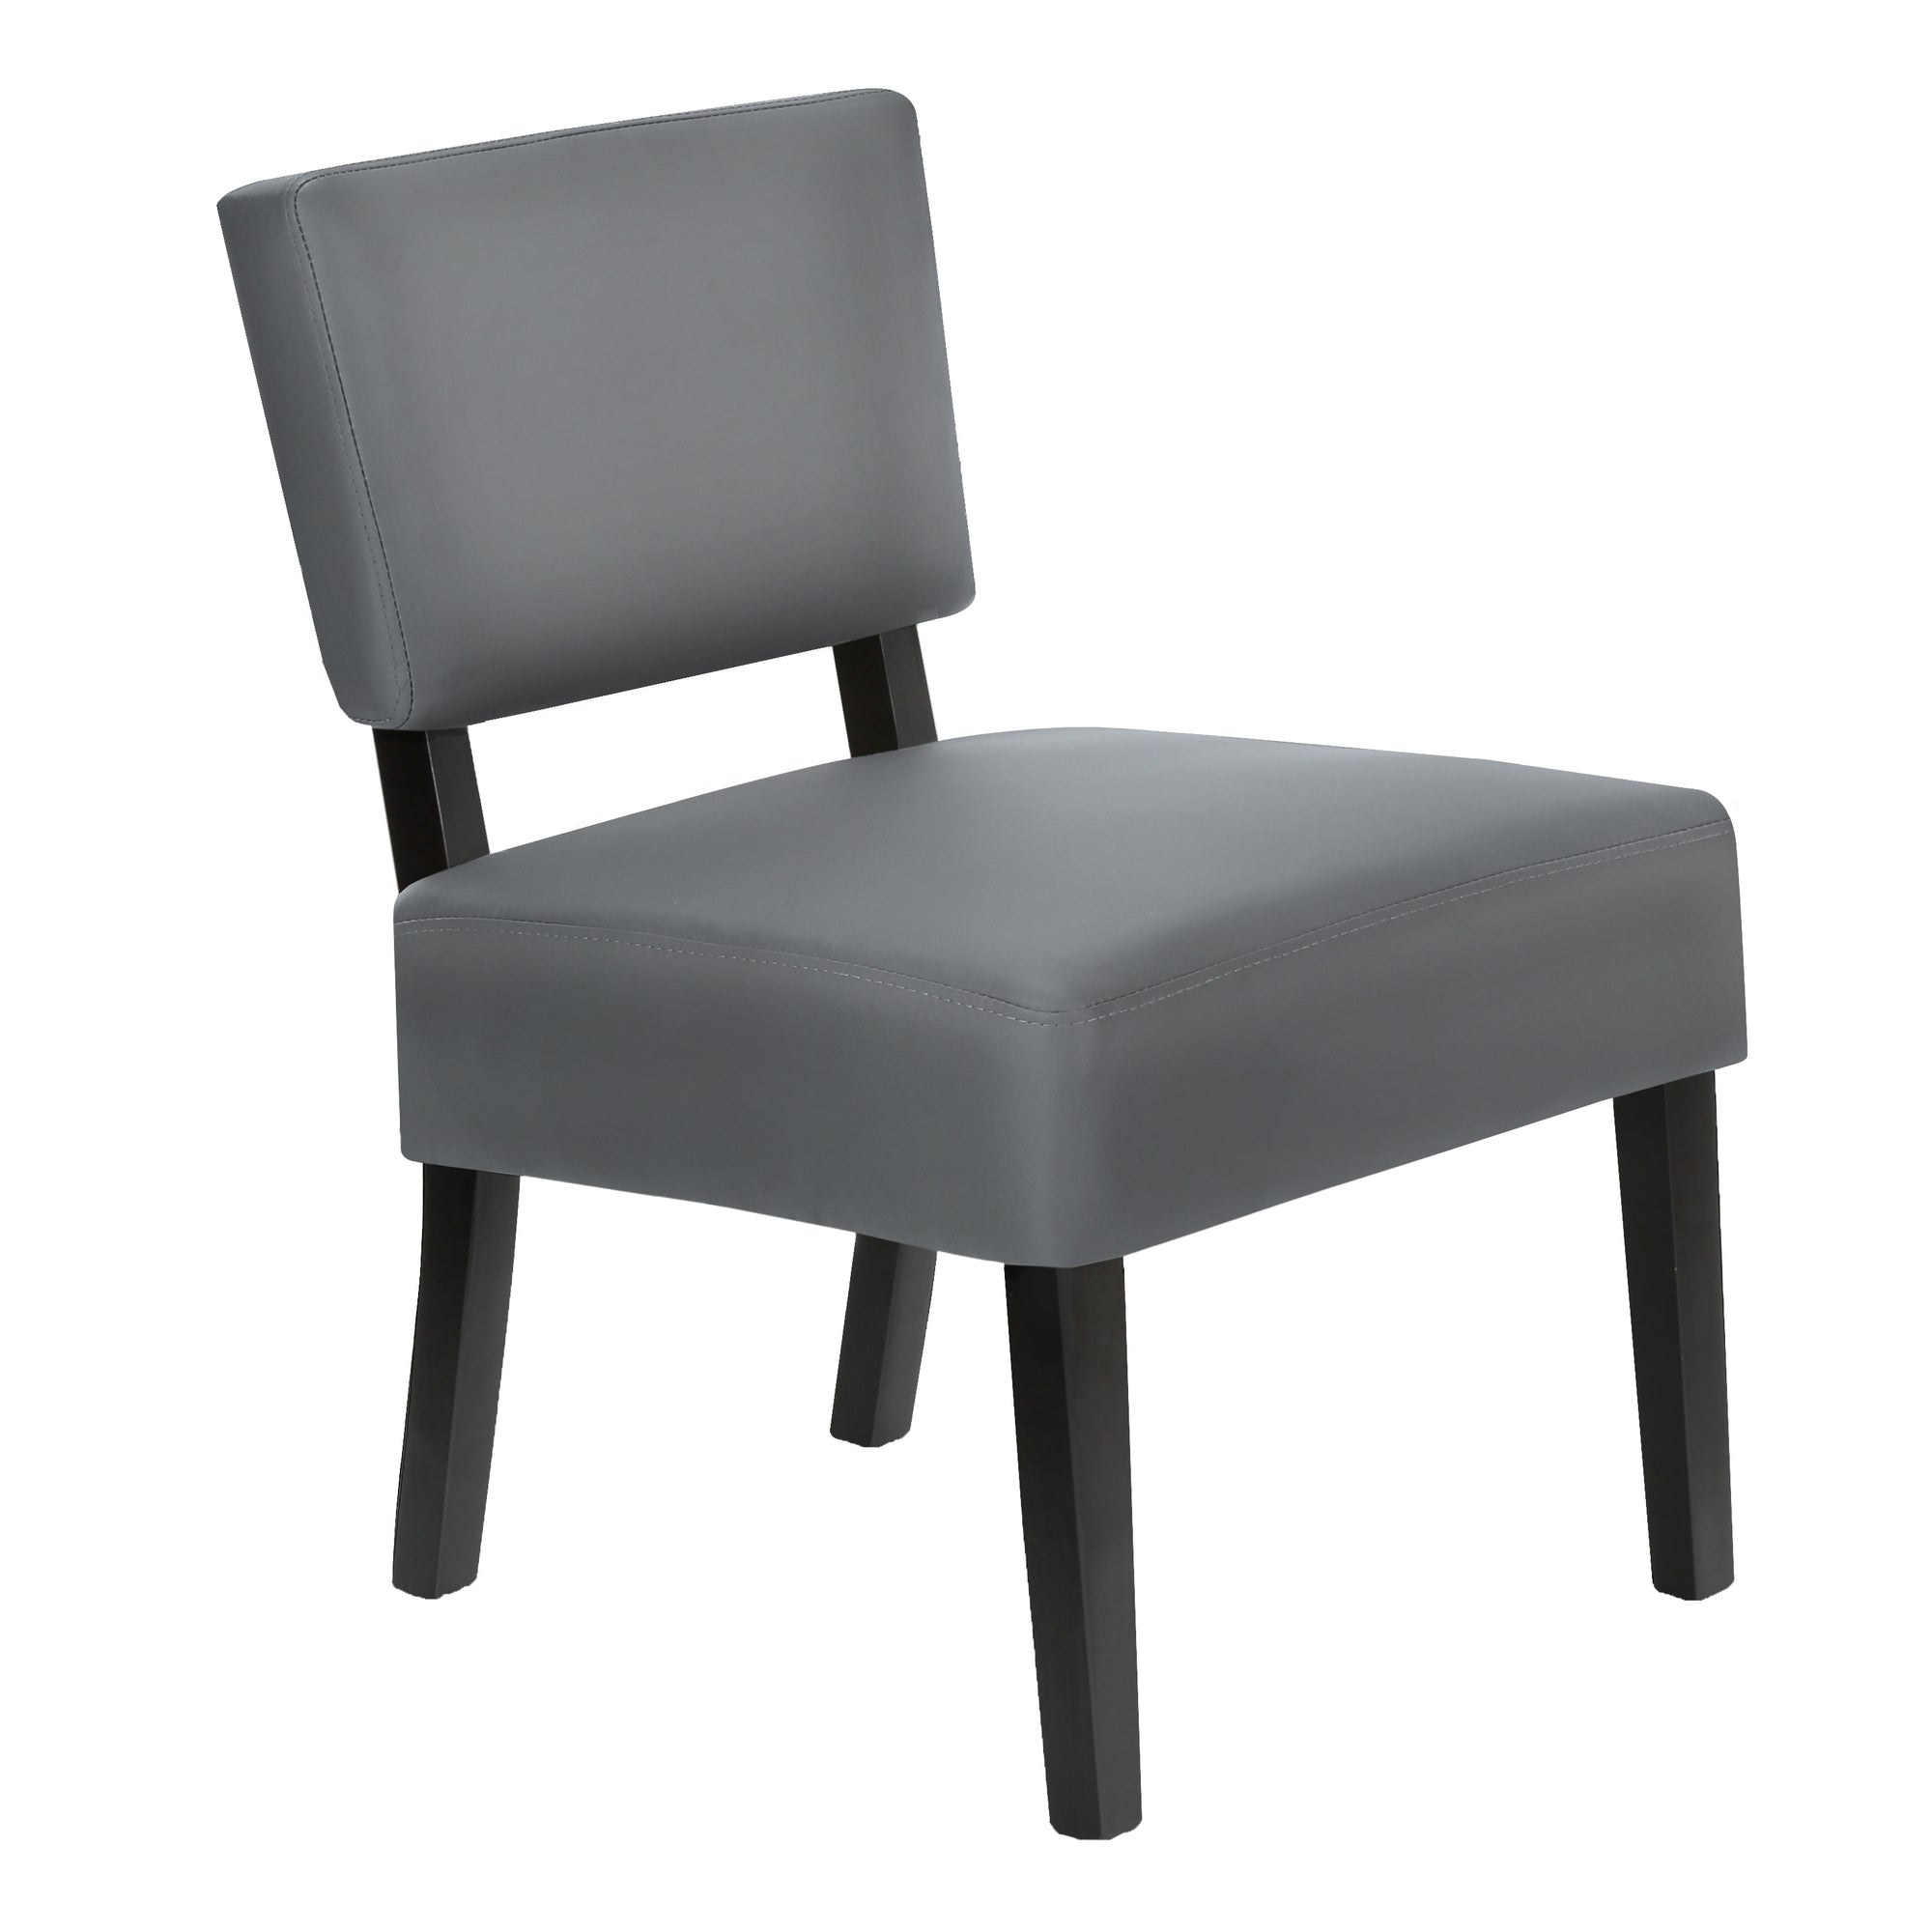 Accent Chair - Grey Leather-Look Fabric